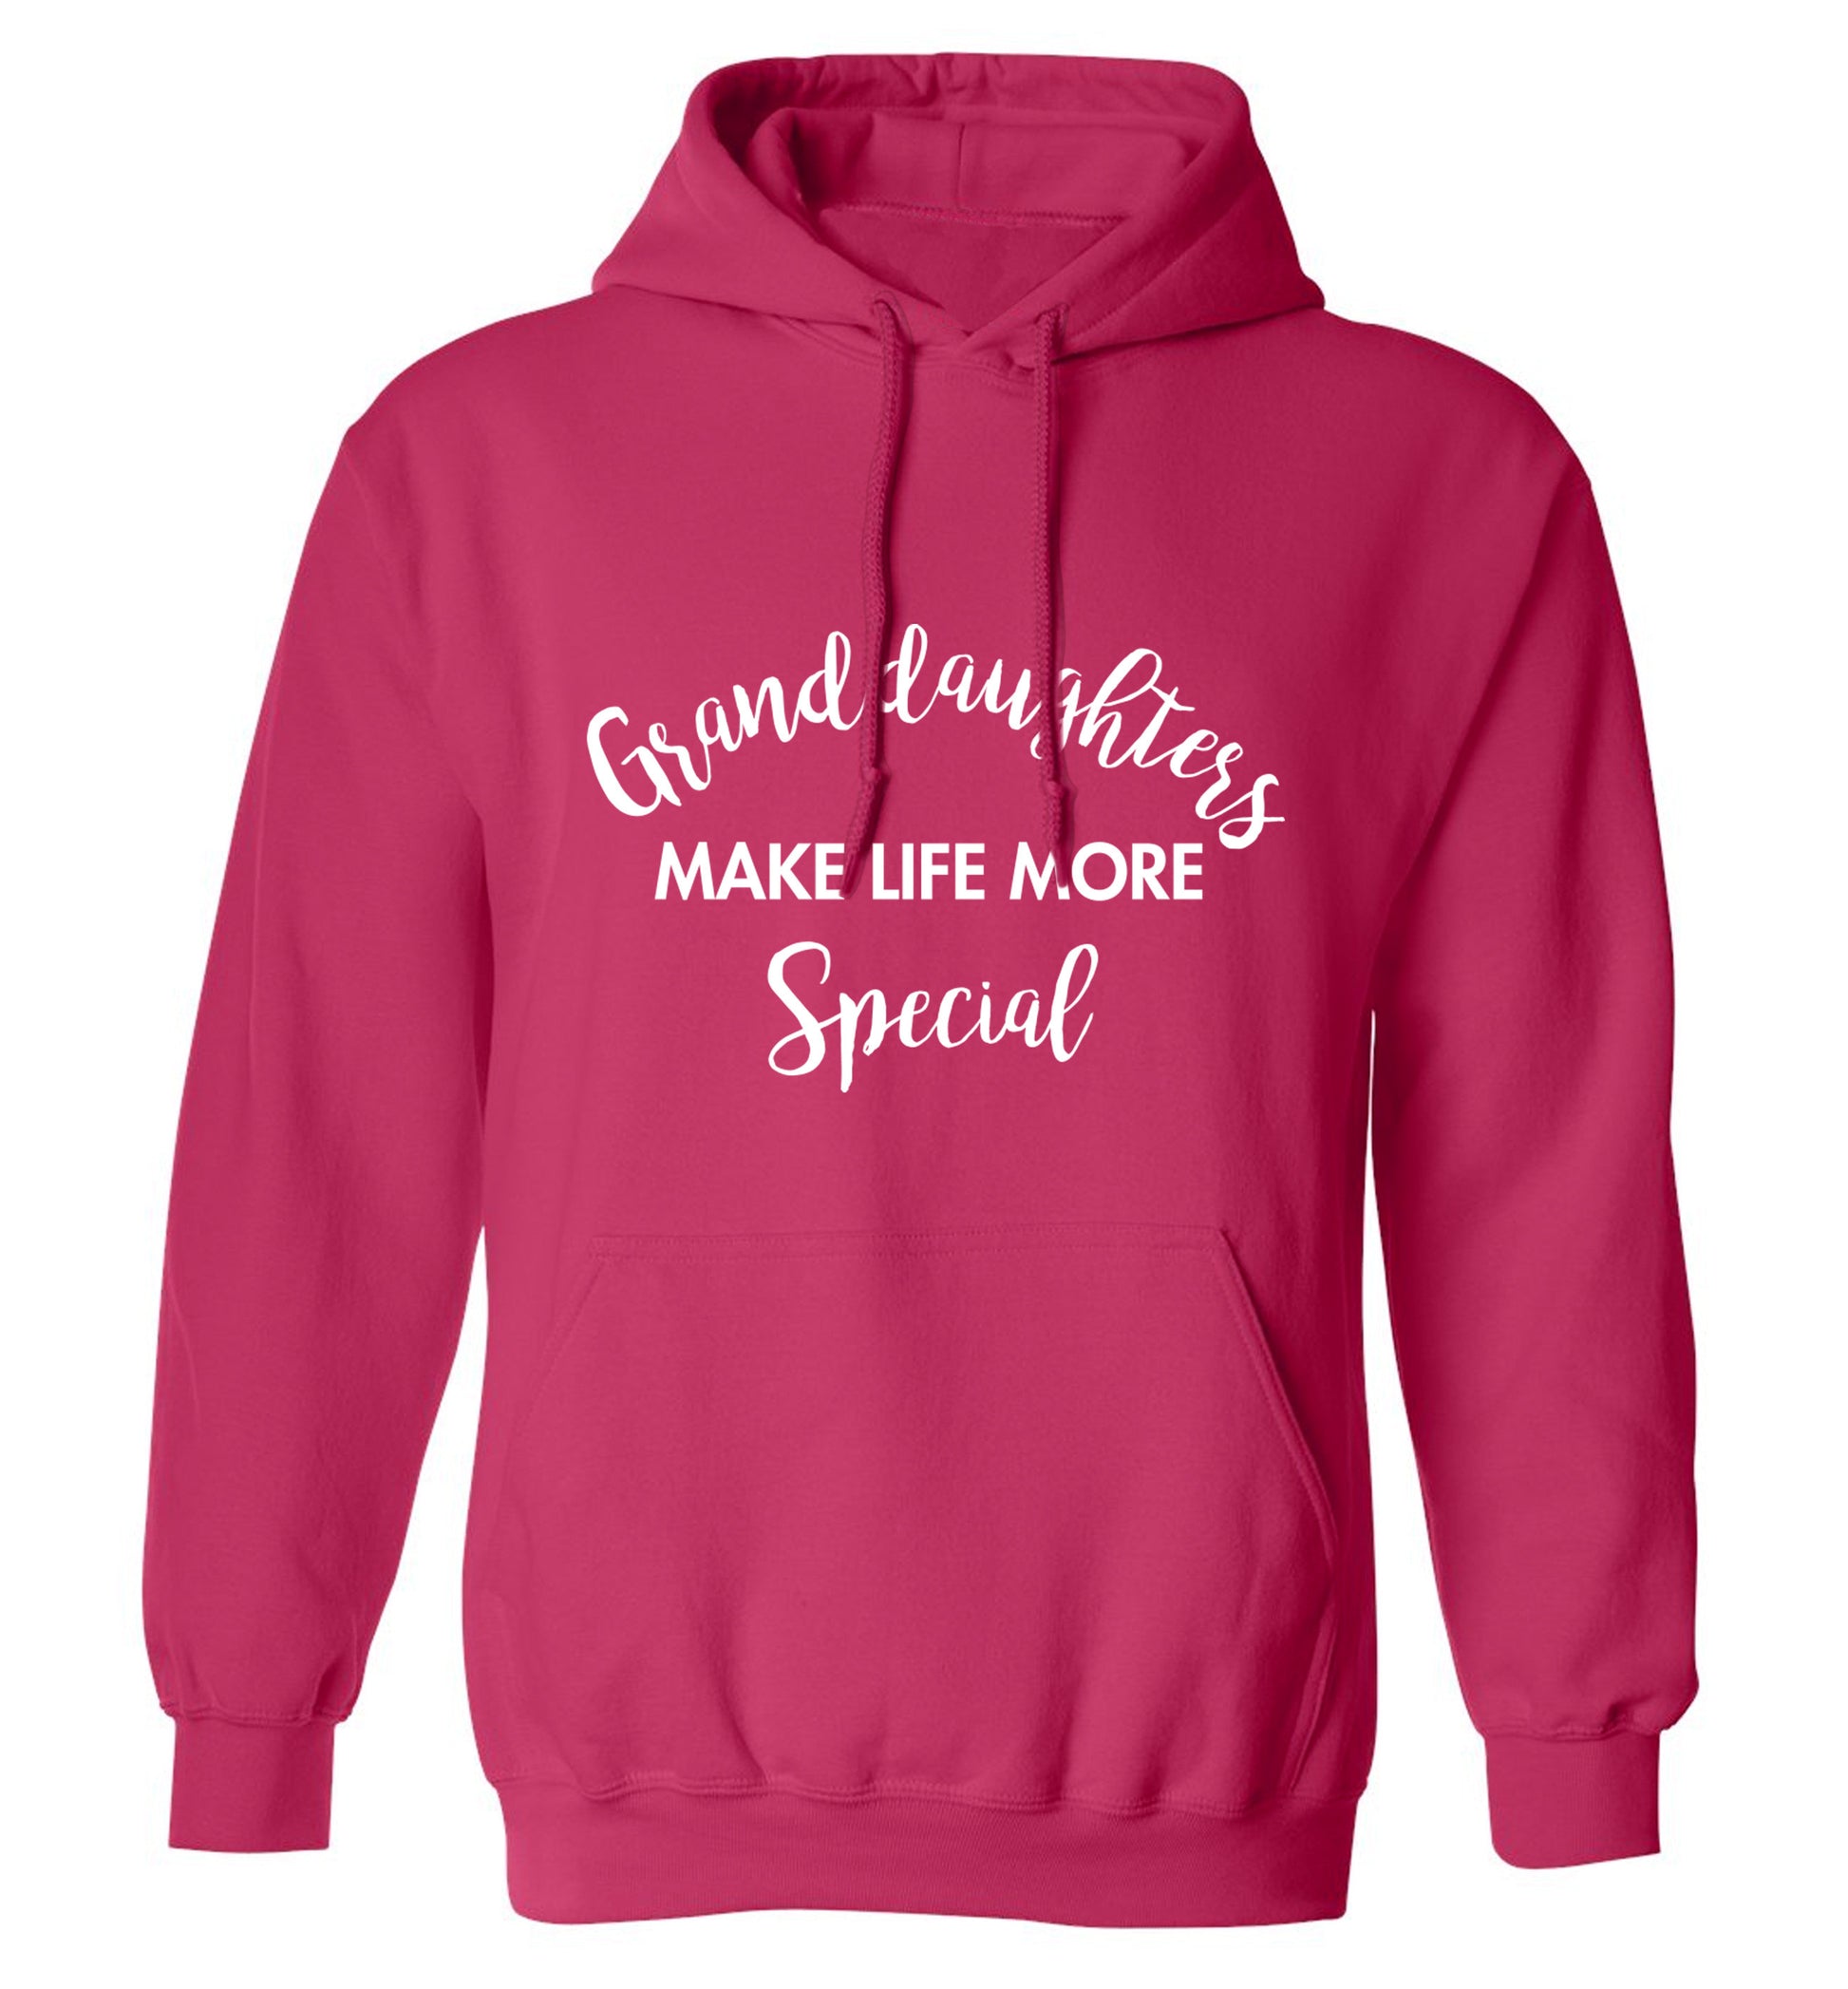 Granddaughters make life more special adults unisex pink hoodie 2XL